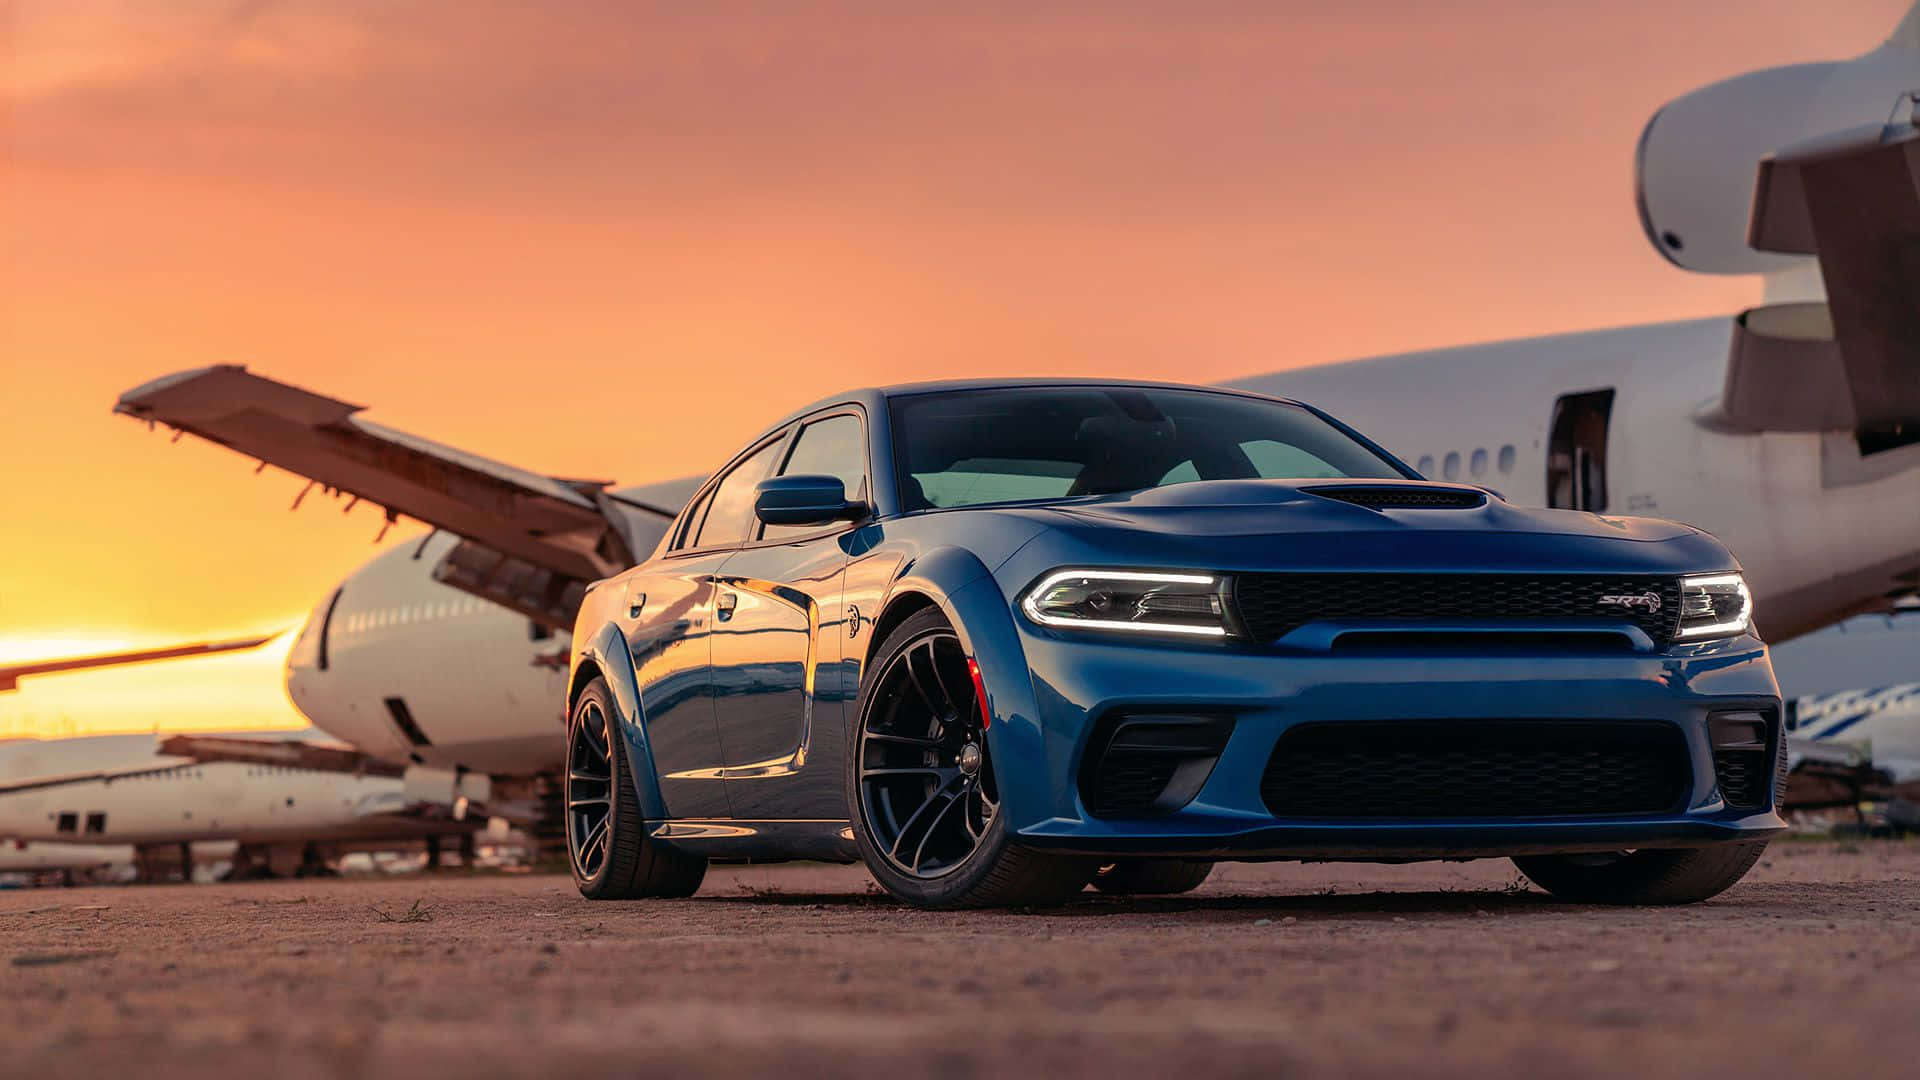 Powerful Dodge Charger Dominating the Roadways Wallpaper